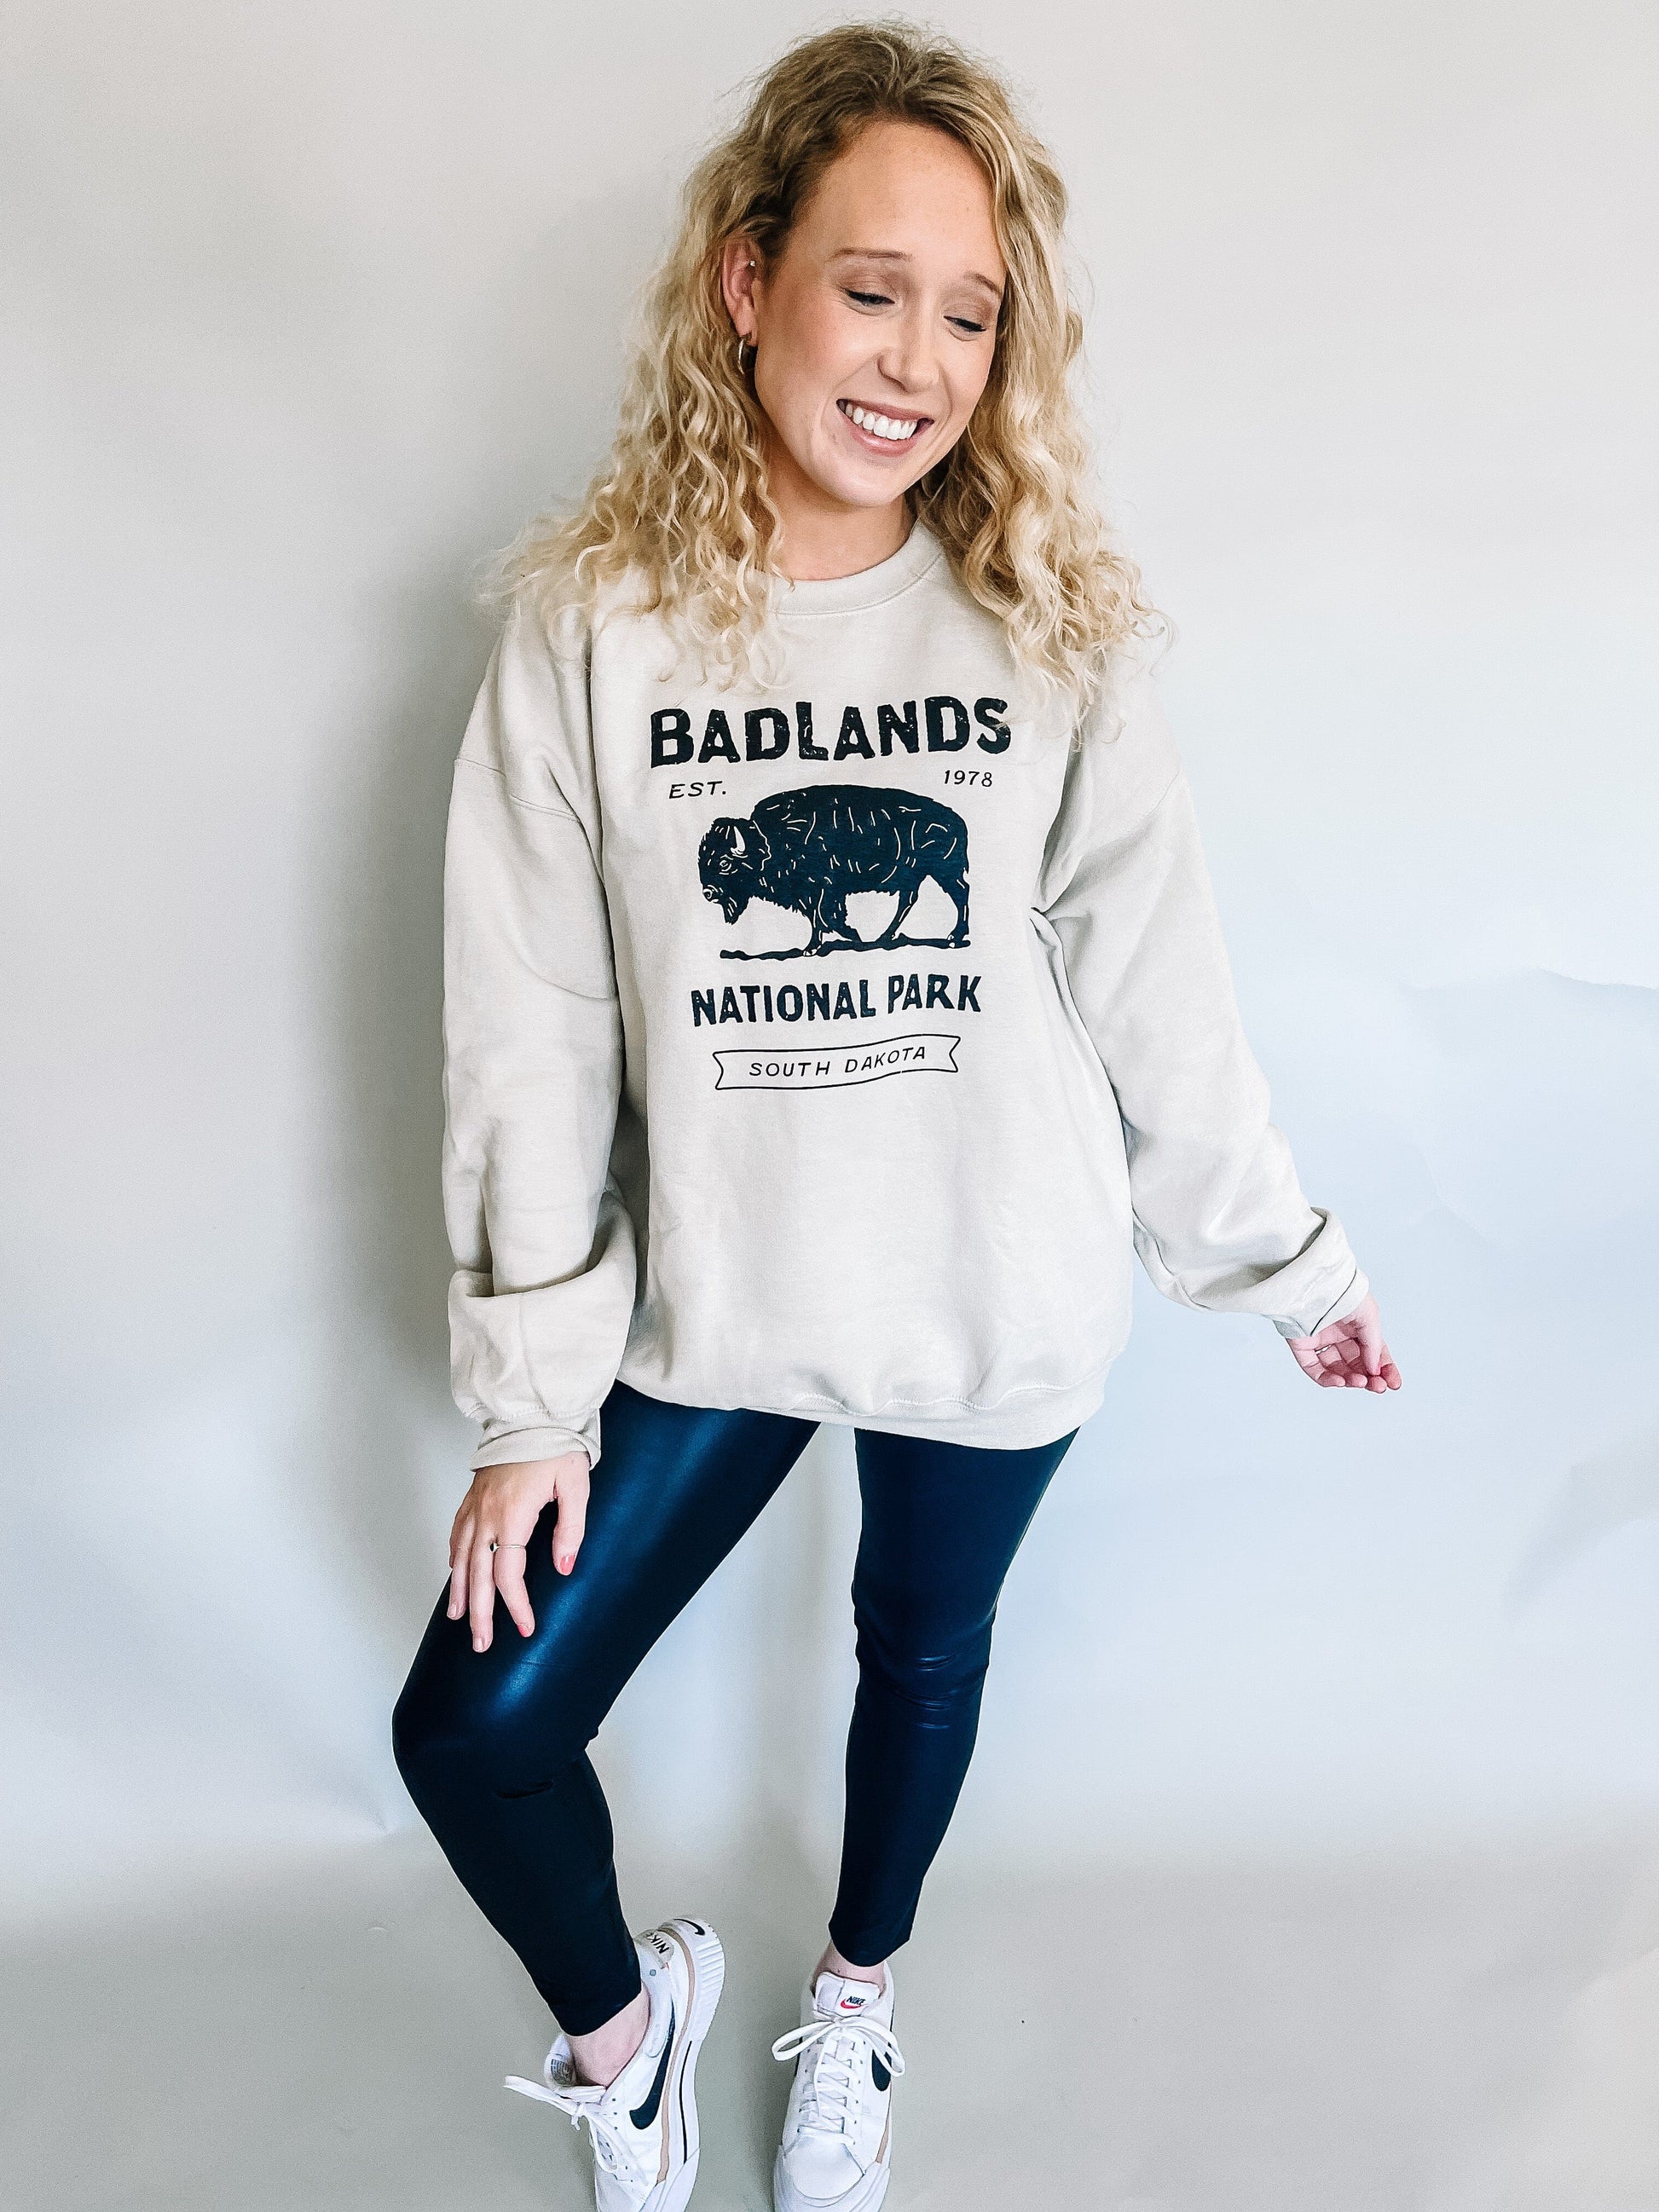 Casual yet stylish model wearing an oversized taupe sweatshirt with a graphic of Badlands National Park and a bison, paired with sleek leather leggings and comfortable white Nike tennis shoes, creating a trendy and relaxed outfit